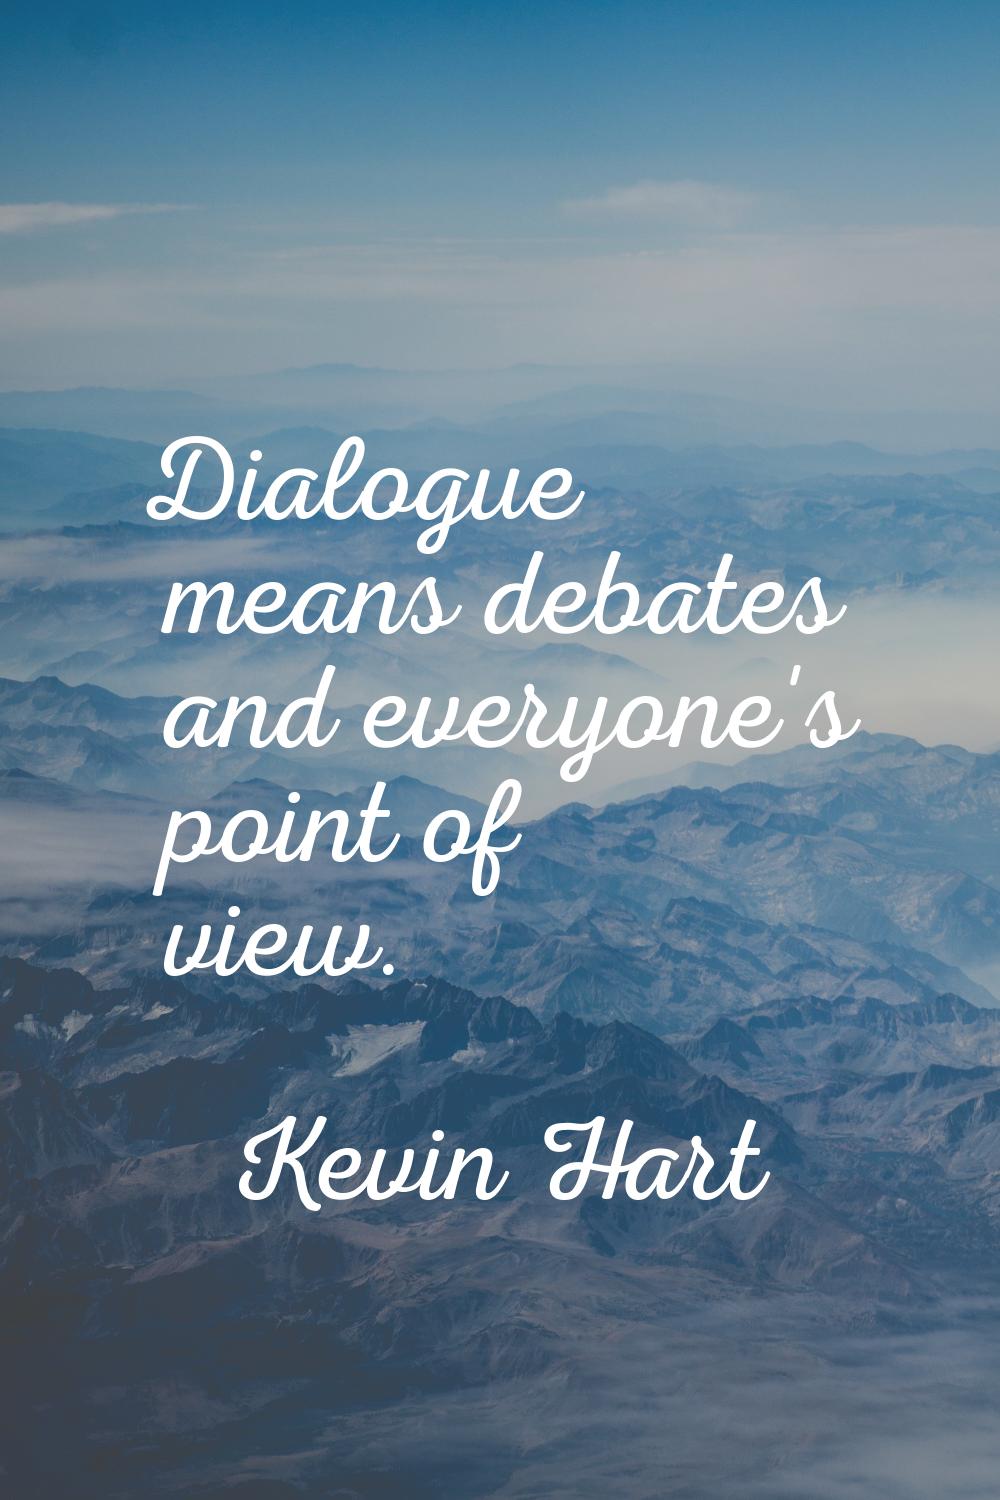 Dialogue means debates and everyone's point of view.